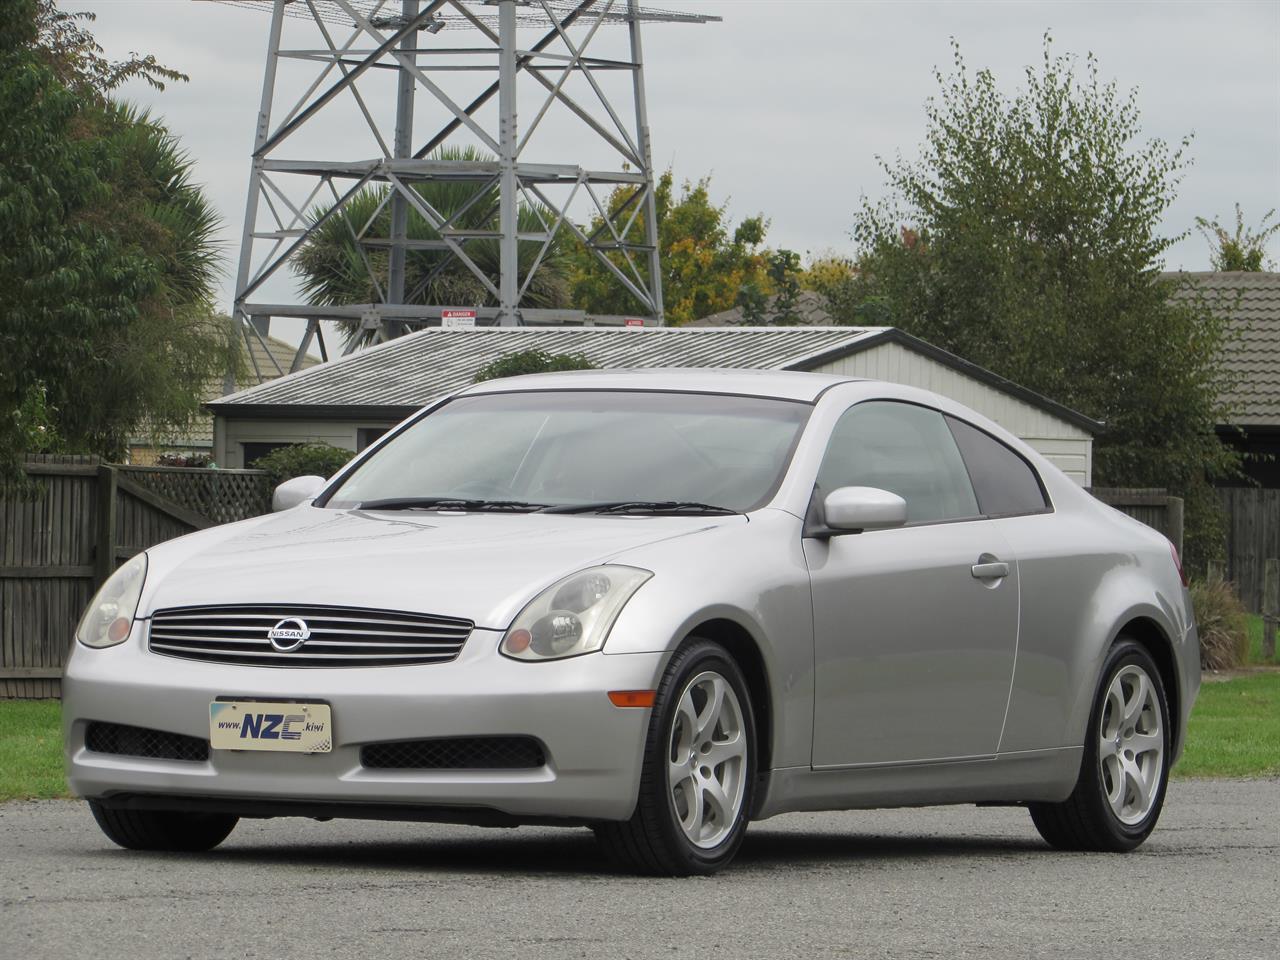 2005 Nissan SKYLINE only $66 weekly